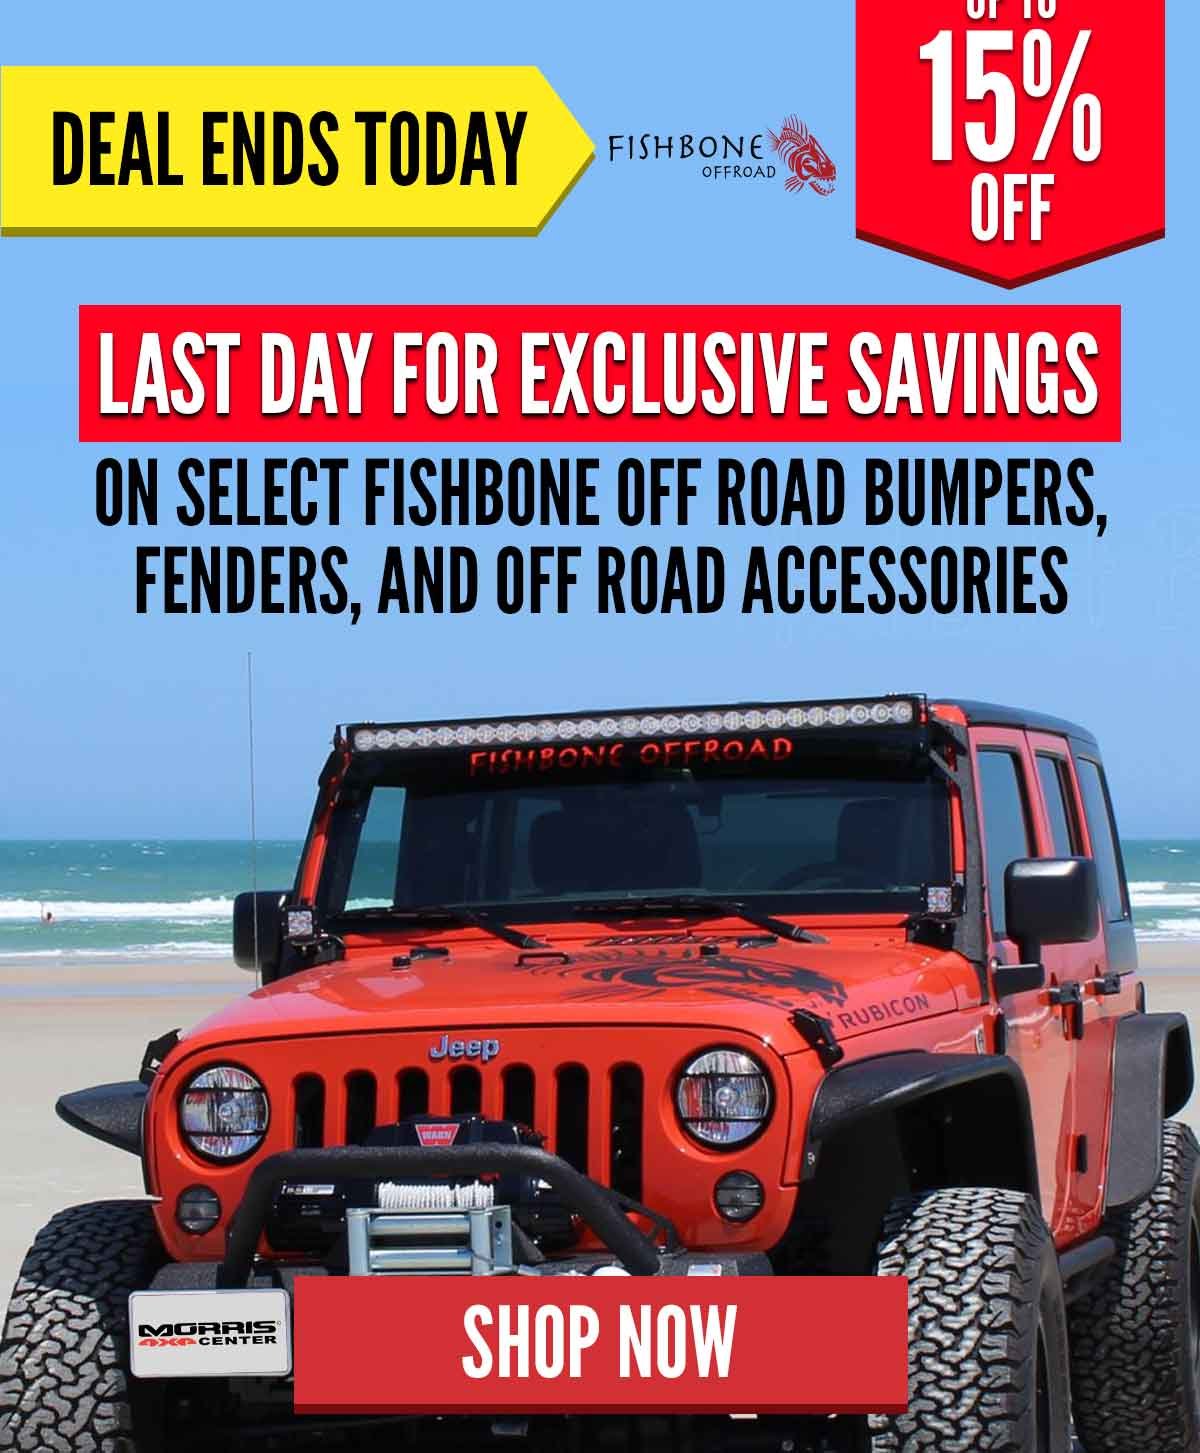 Last Day For Exclusive Savings On Select Fishbone Off Road Bumpers, Fenders, and Off Road Accessories